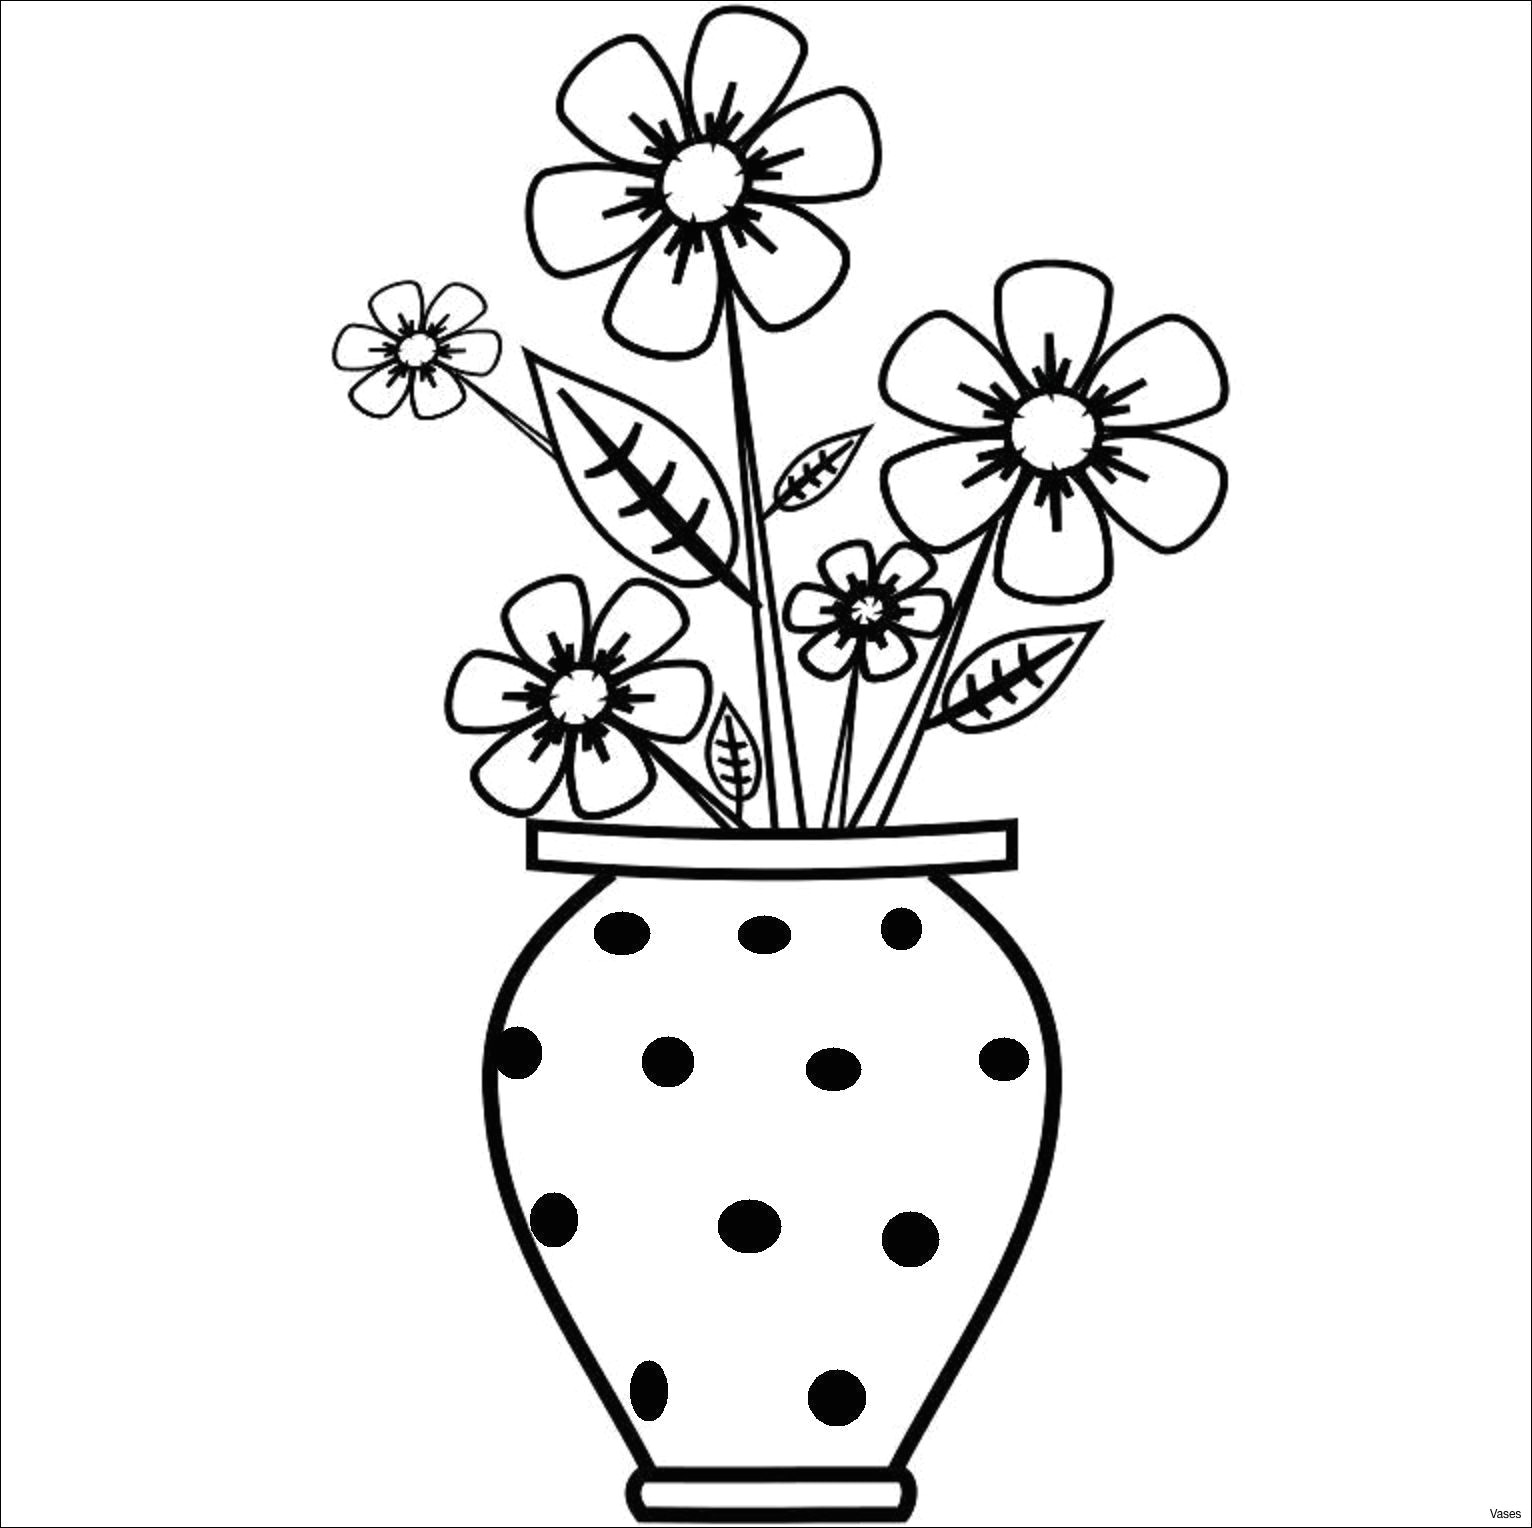 Easy Drawing Jobs Images Of Easy Drawings Vase Art Drawings How to Draw A Vase Step 2h